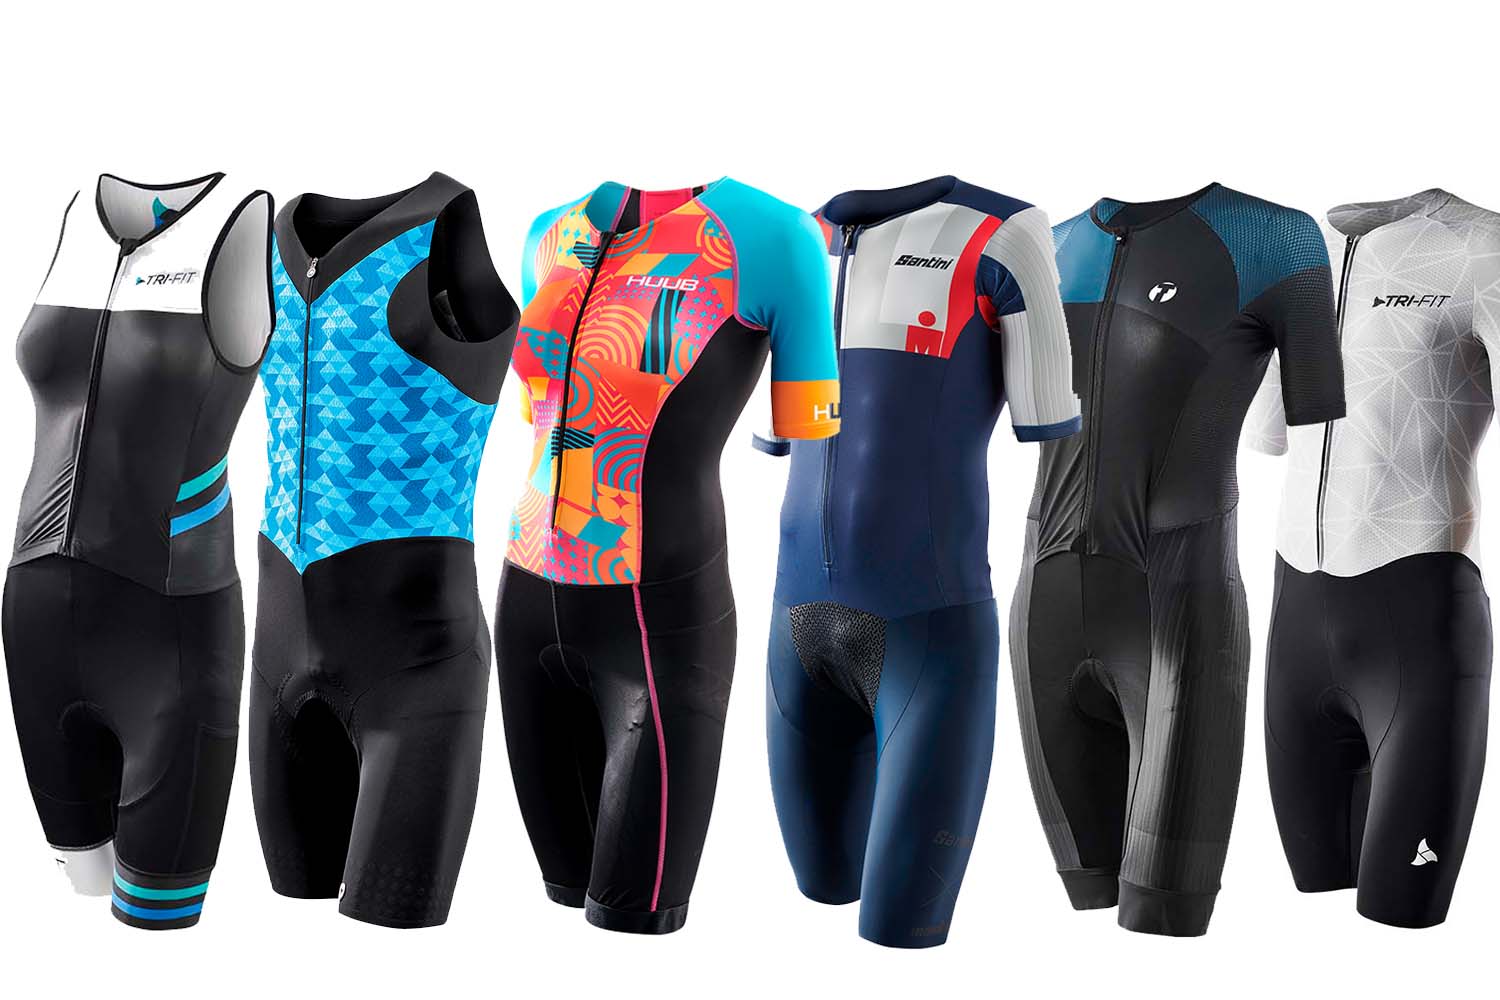 REVEALED: AFFORDABLE AND VERSATILE ATHLETIC WEAR BRANDS – Tria